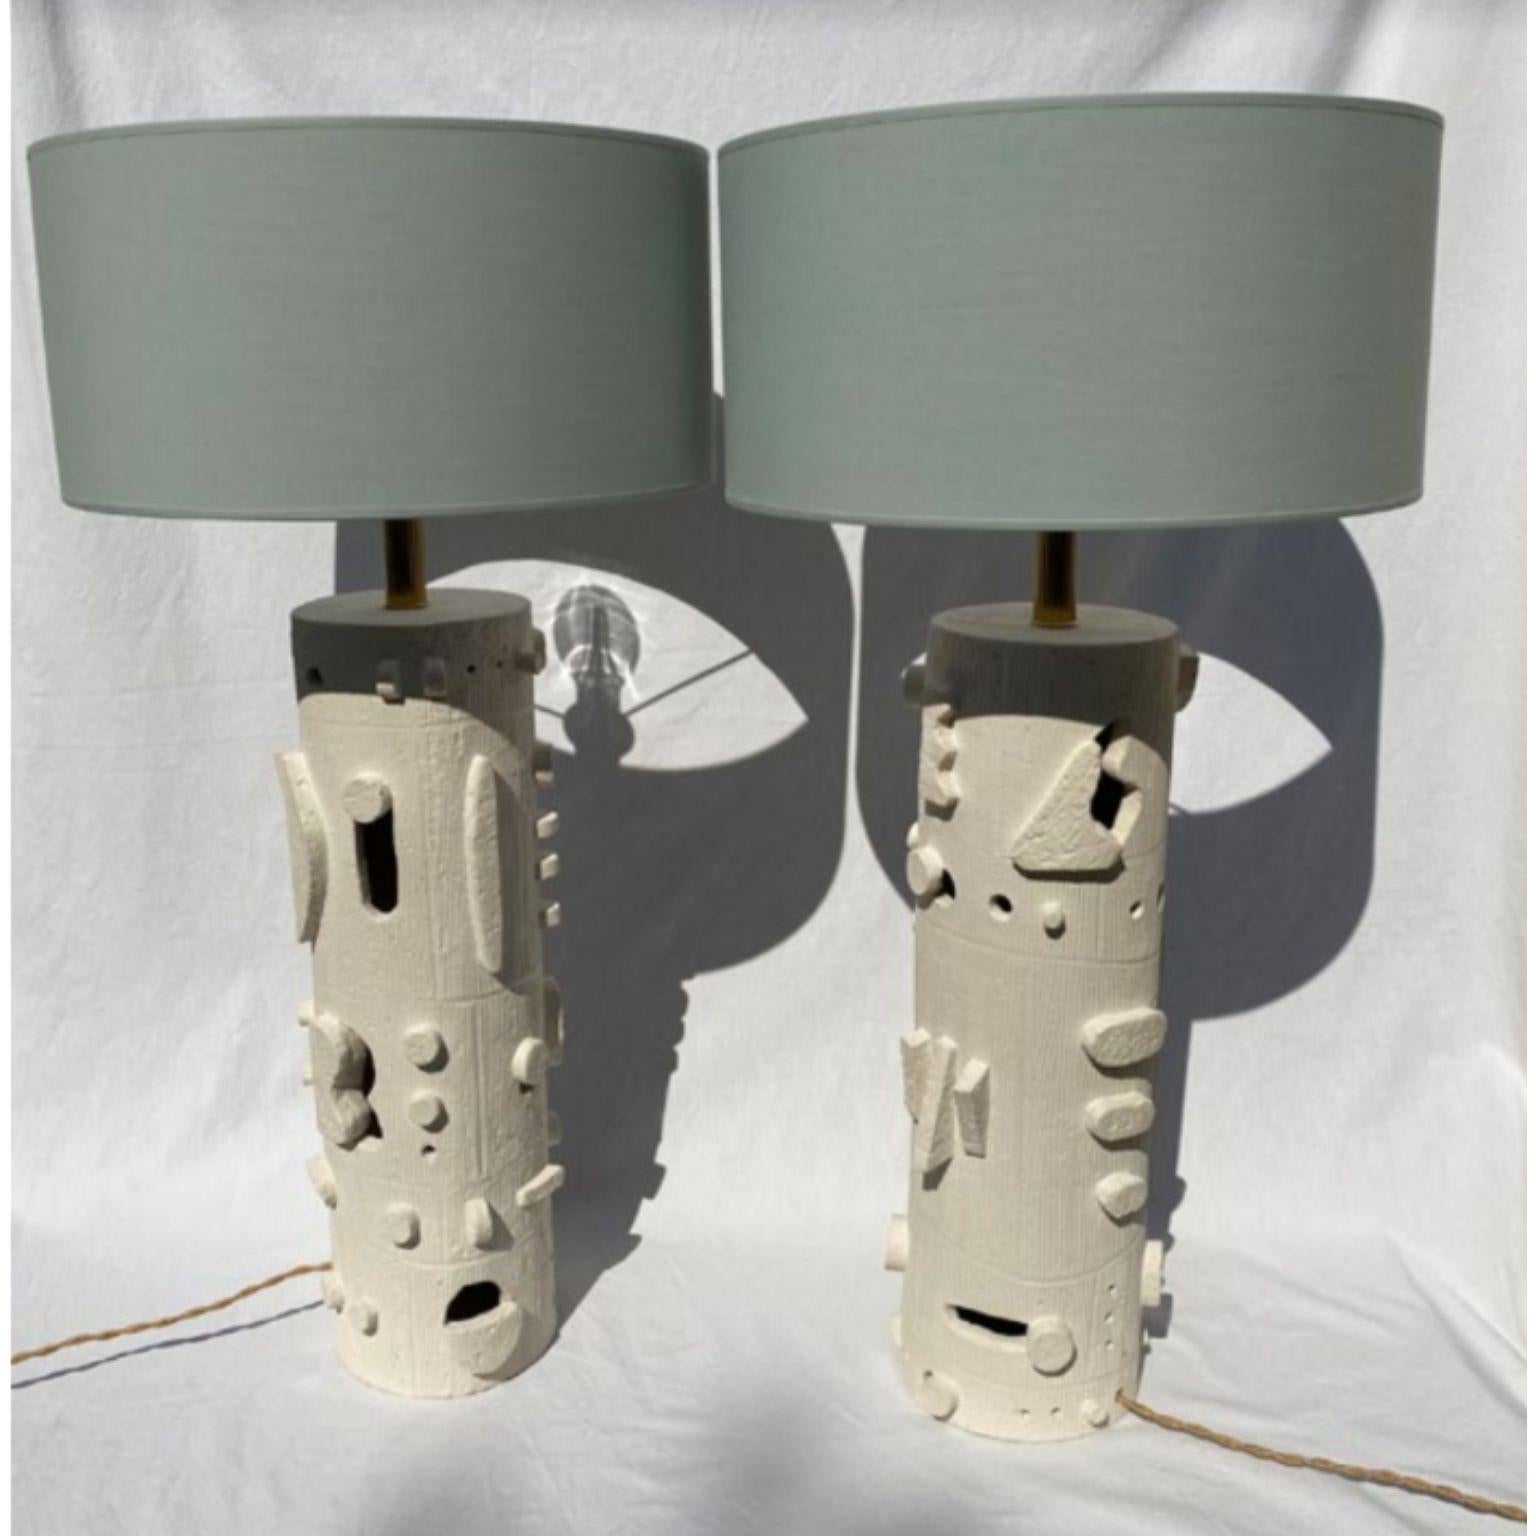 Set of 2 standing lamp by Olivia Cognet.
Materials: ceramic, fabric, metal.
Dimensions: H 50 cm

A new take on the curves of nature in a series of lamps that produce a diffuse light created by a subtle interplay of layers.

Since moving to Los